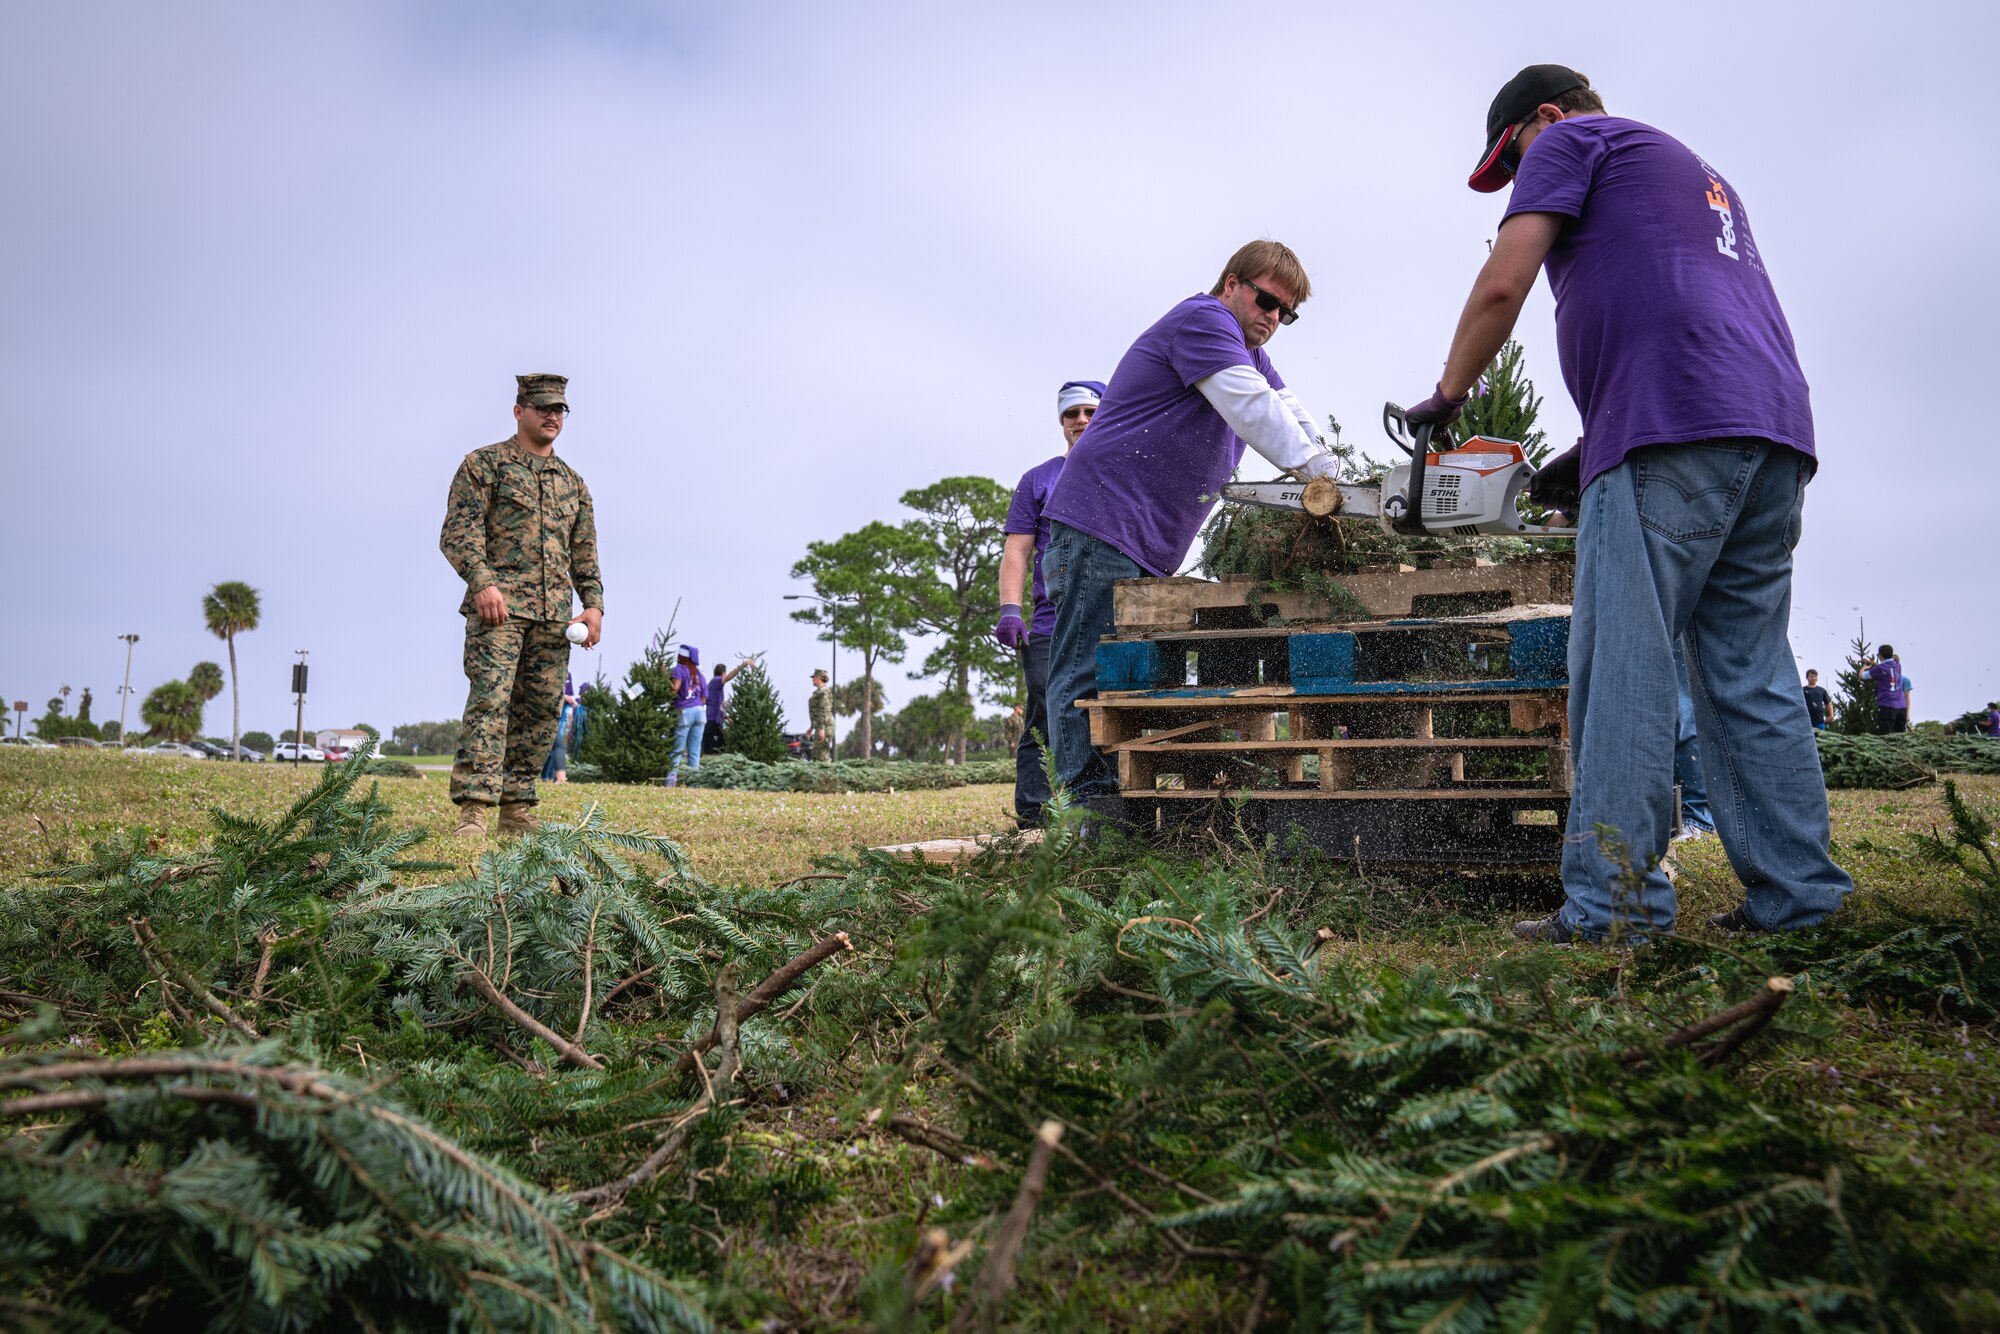 Volunteers trim Christmas trees during the Trees for Troops event at MacDill Air Force Base, Florida, Dec. 9, 2021.